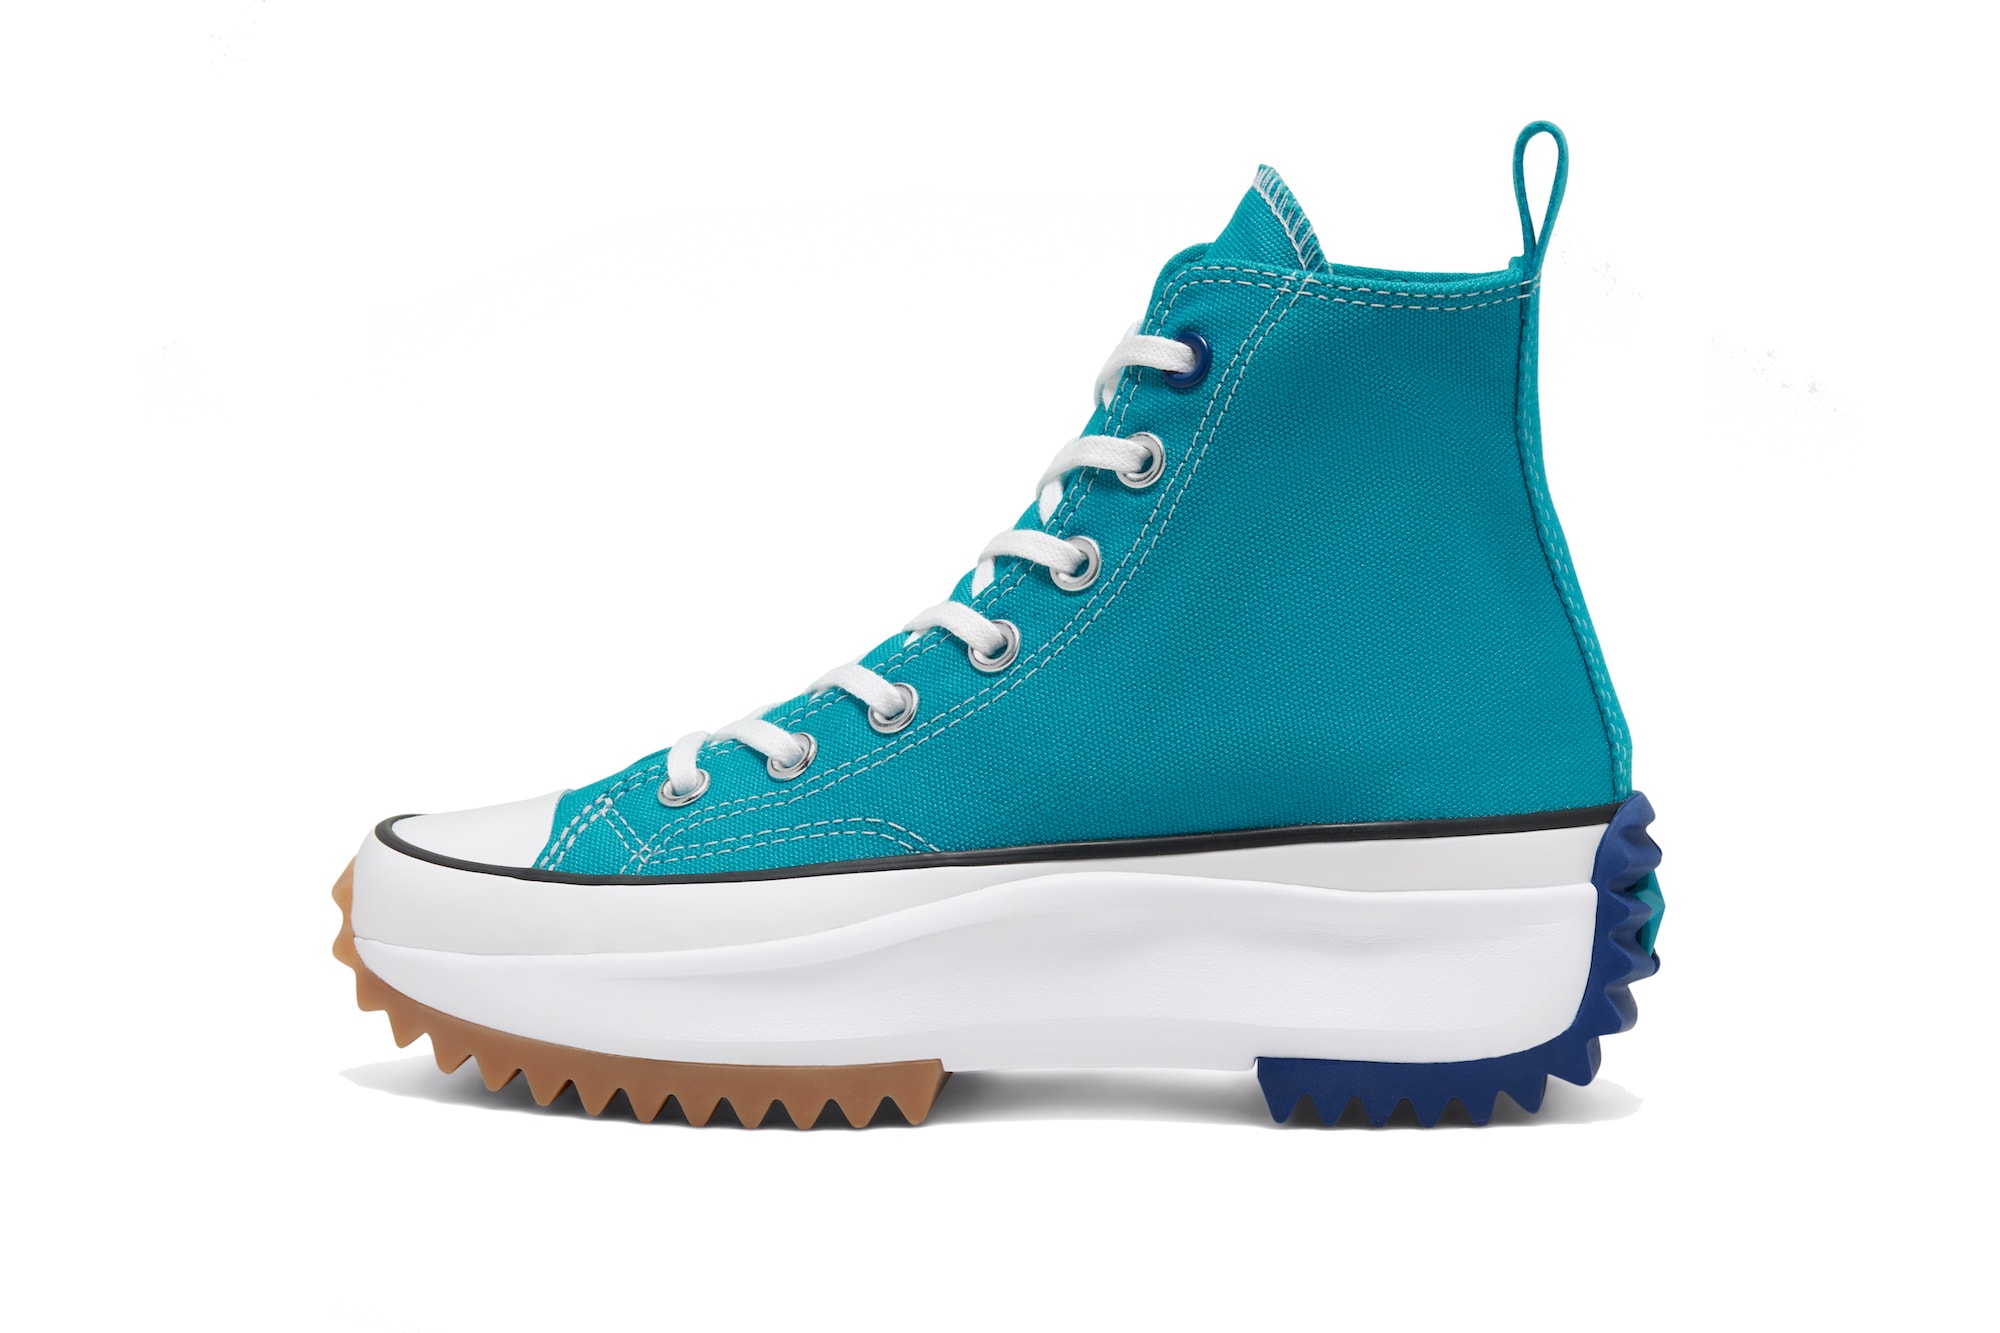 Converse Run Star Hike SS20 Red Teal Release Platform Shoe Spring Colorway